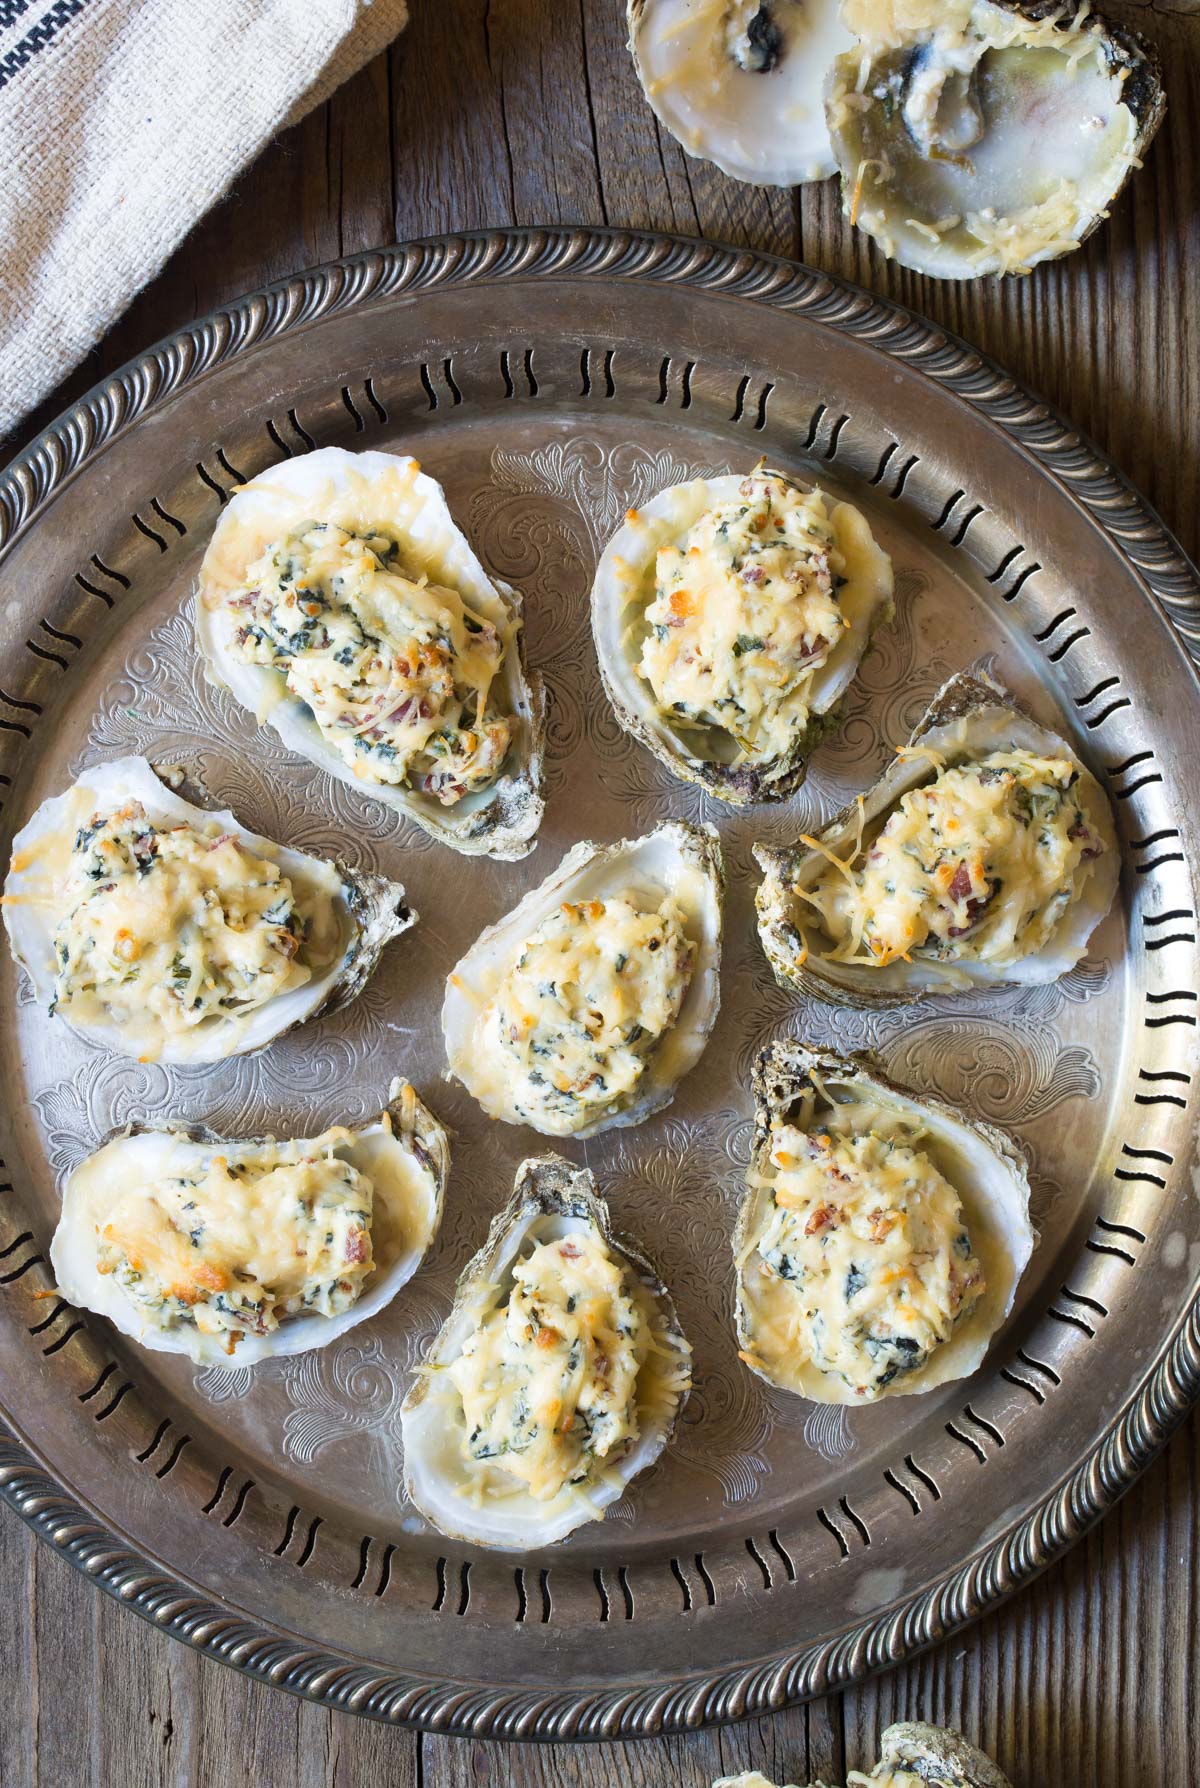 Easy Three-Cheese Baked Oysters Recipe (In The Shell!) #ASpicyPerspective #holiday #newyears #christmas